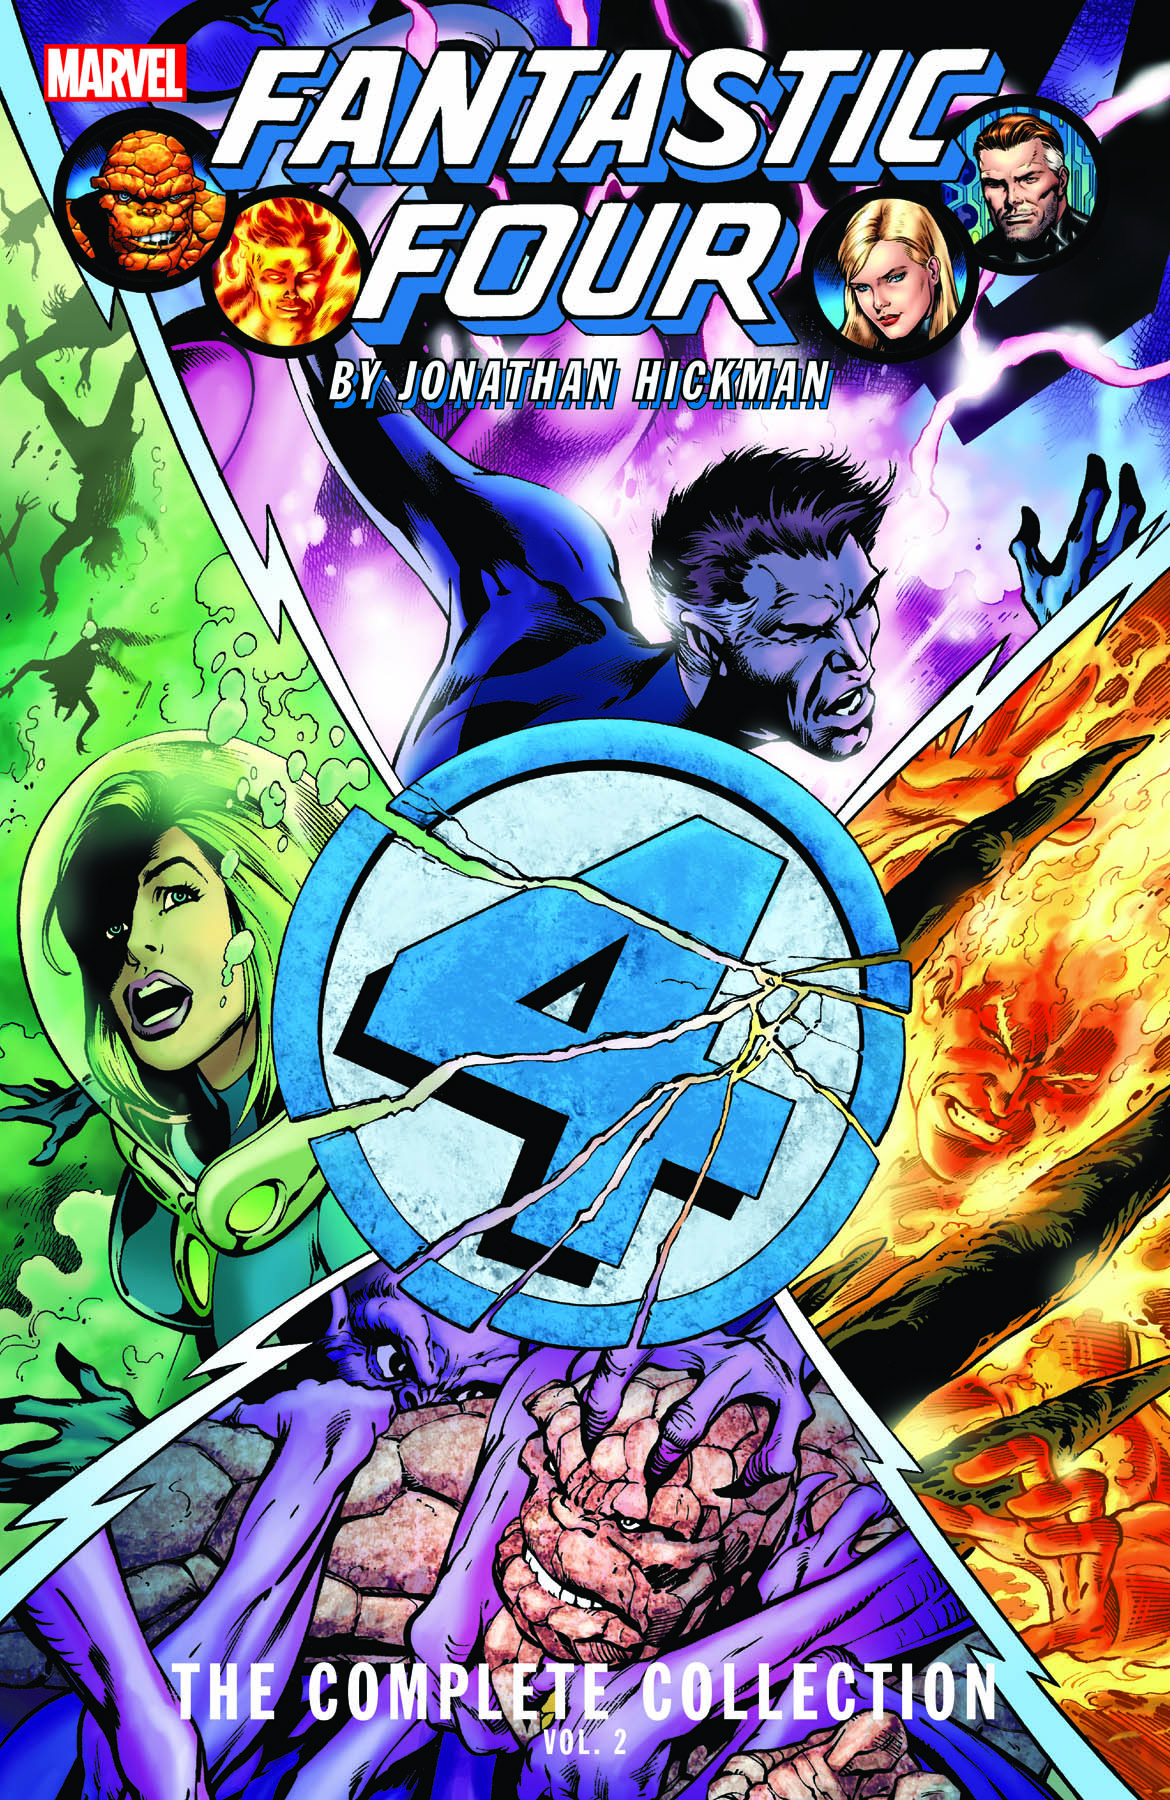 Fantastic Four By Jonathan Hickman: The Complete Collection Vol. 2 (Trade Paperback)